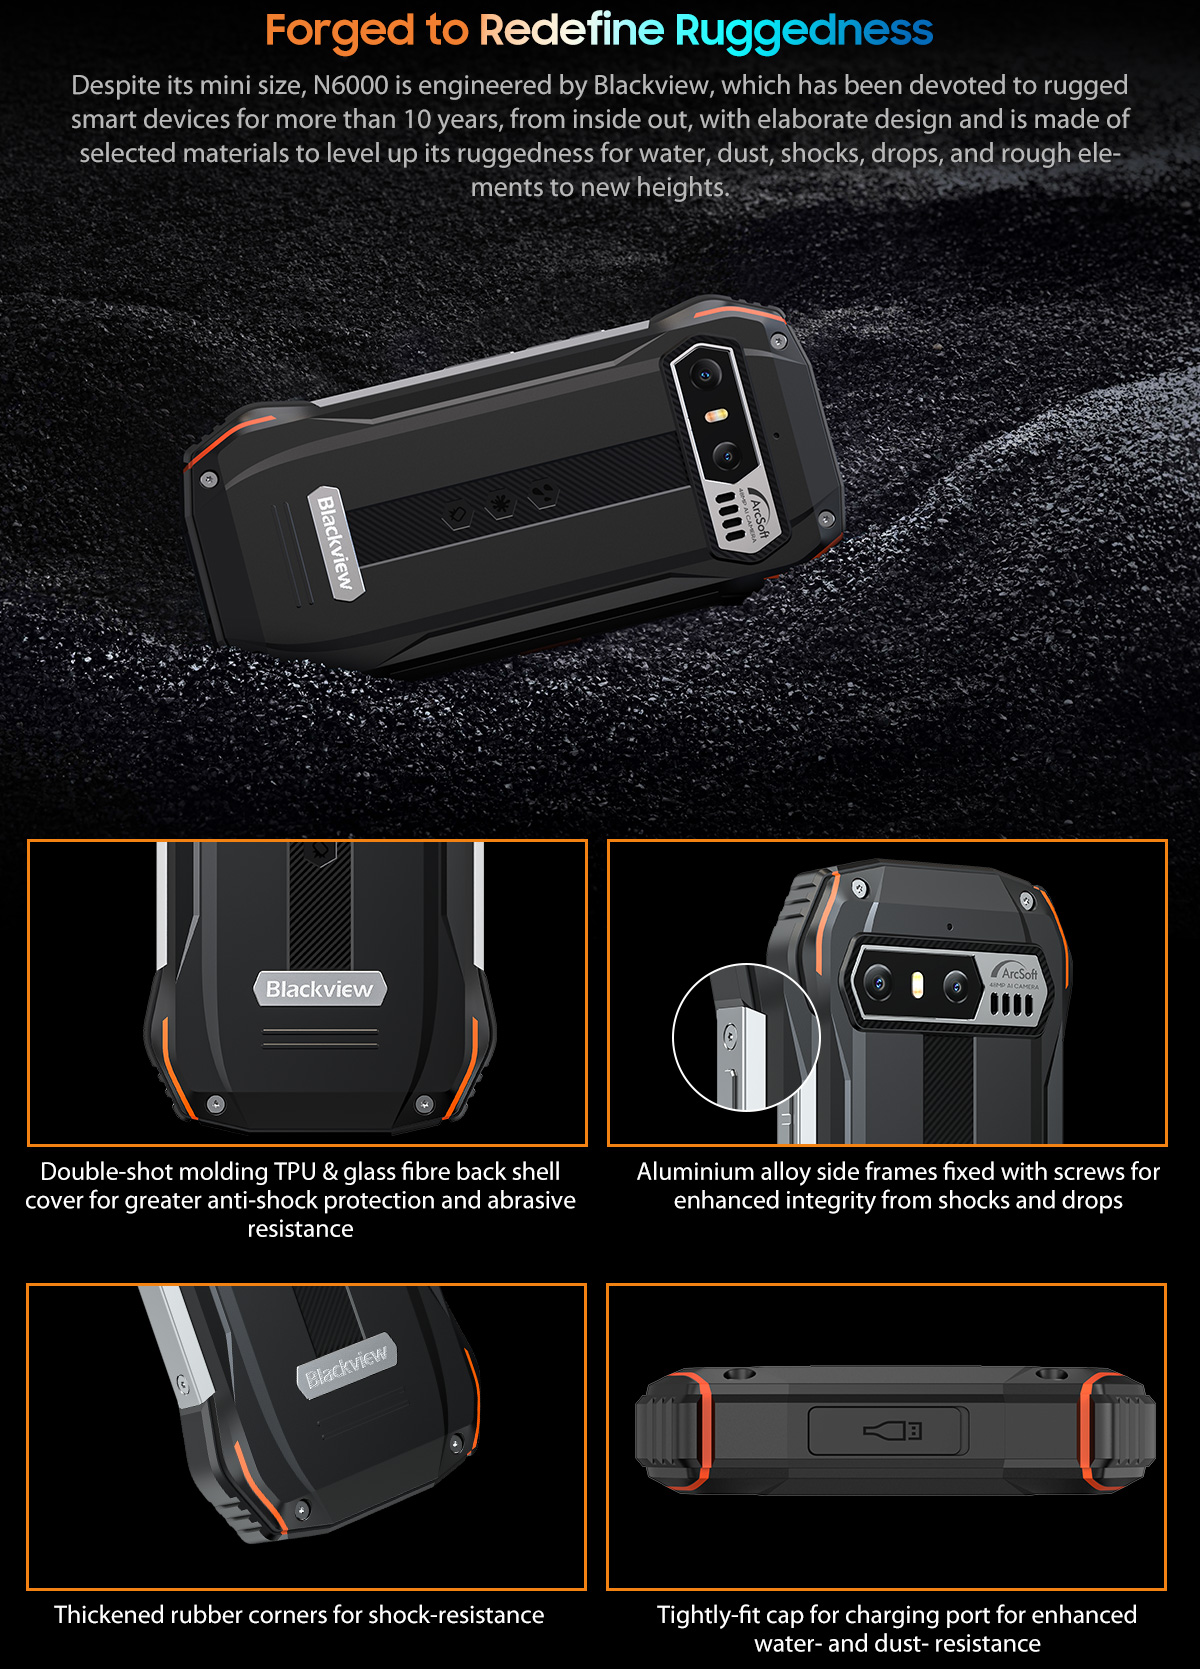 Blackview N6000: the first rugged mini makes its appearance